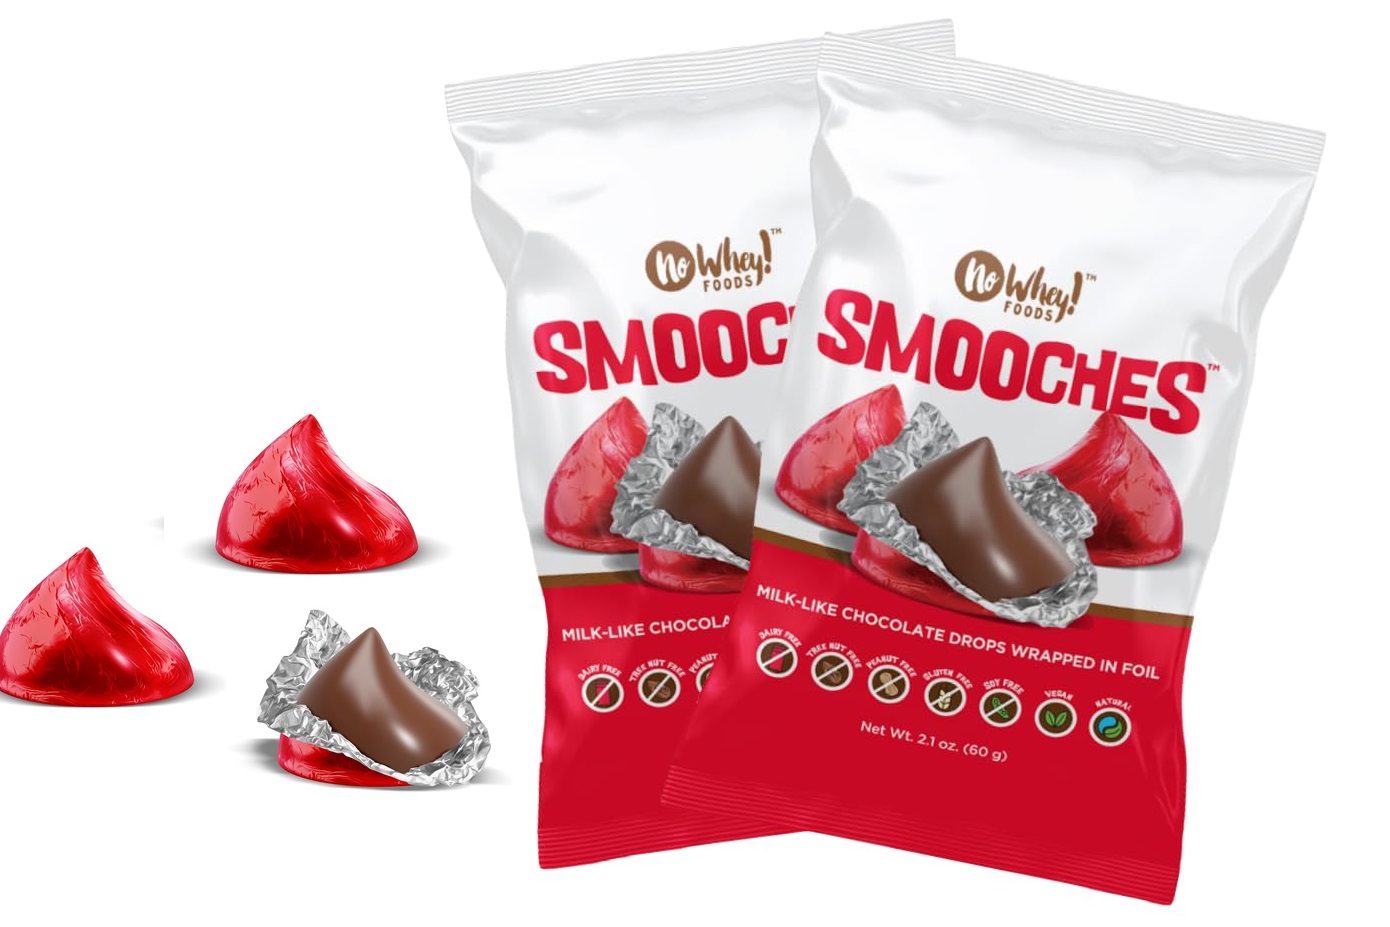 No Whey Smooches Reviews & Info (Vegan Chocolate "Kisses") - allergy-friendly - made in a facility free of dairy, gluten, nuts, soy, and all of the 9 top allergens